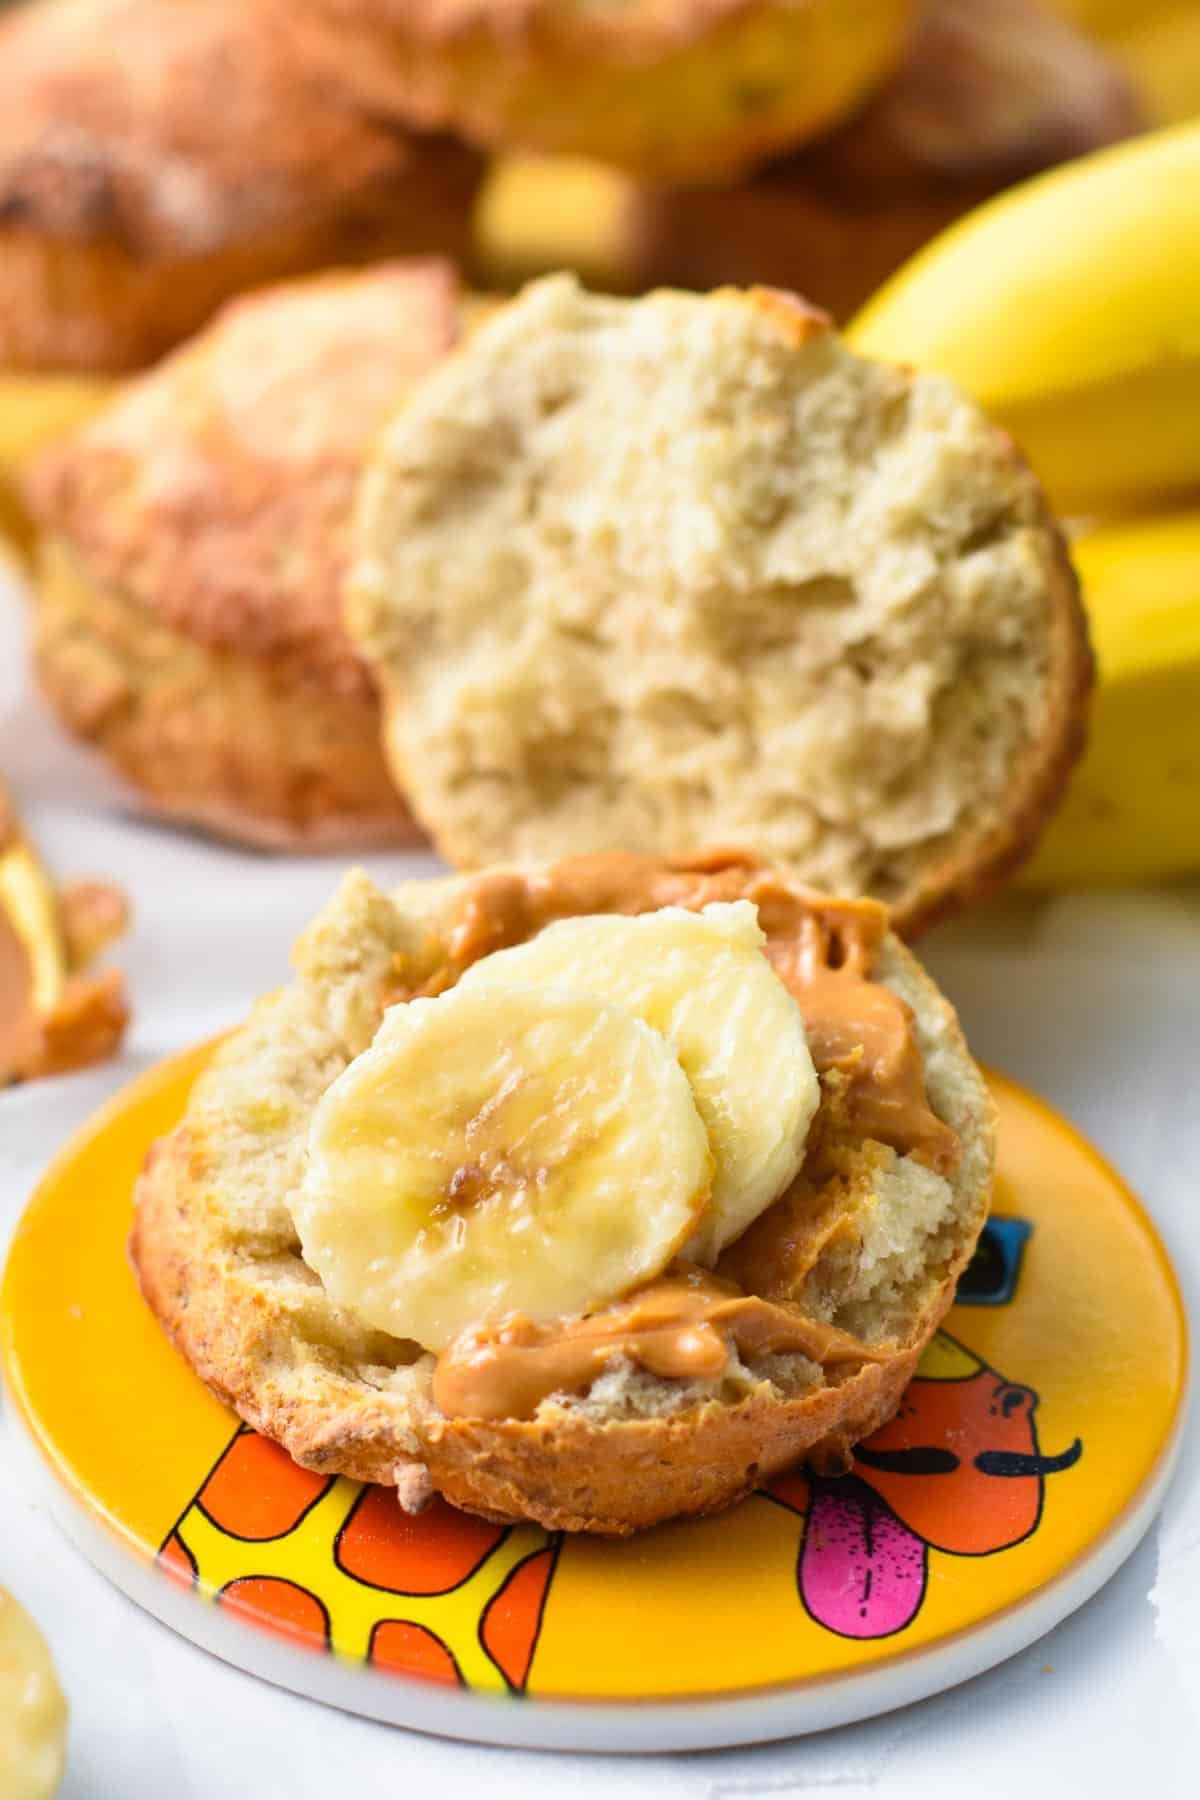 A banana scone half open with one of the half covered with peanut butter and 2 slices of bananas.